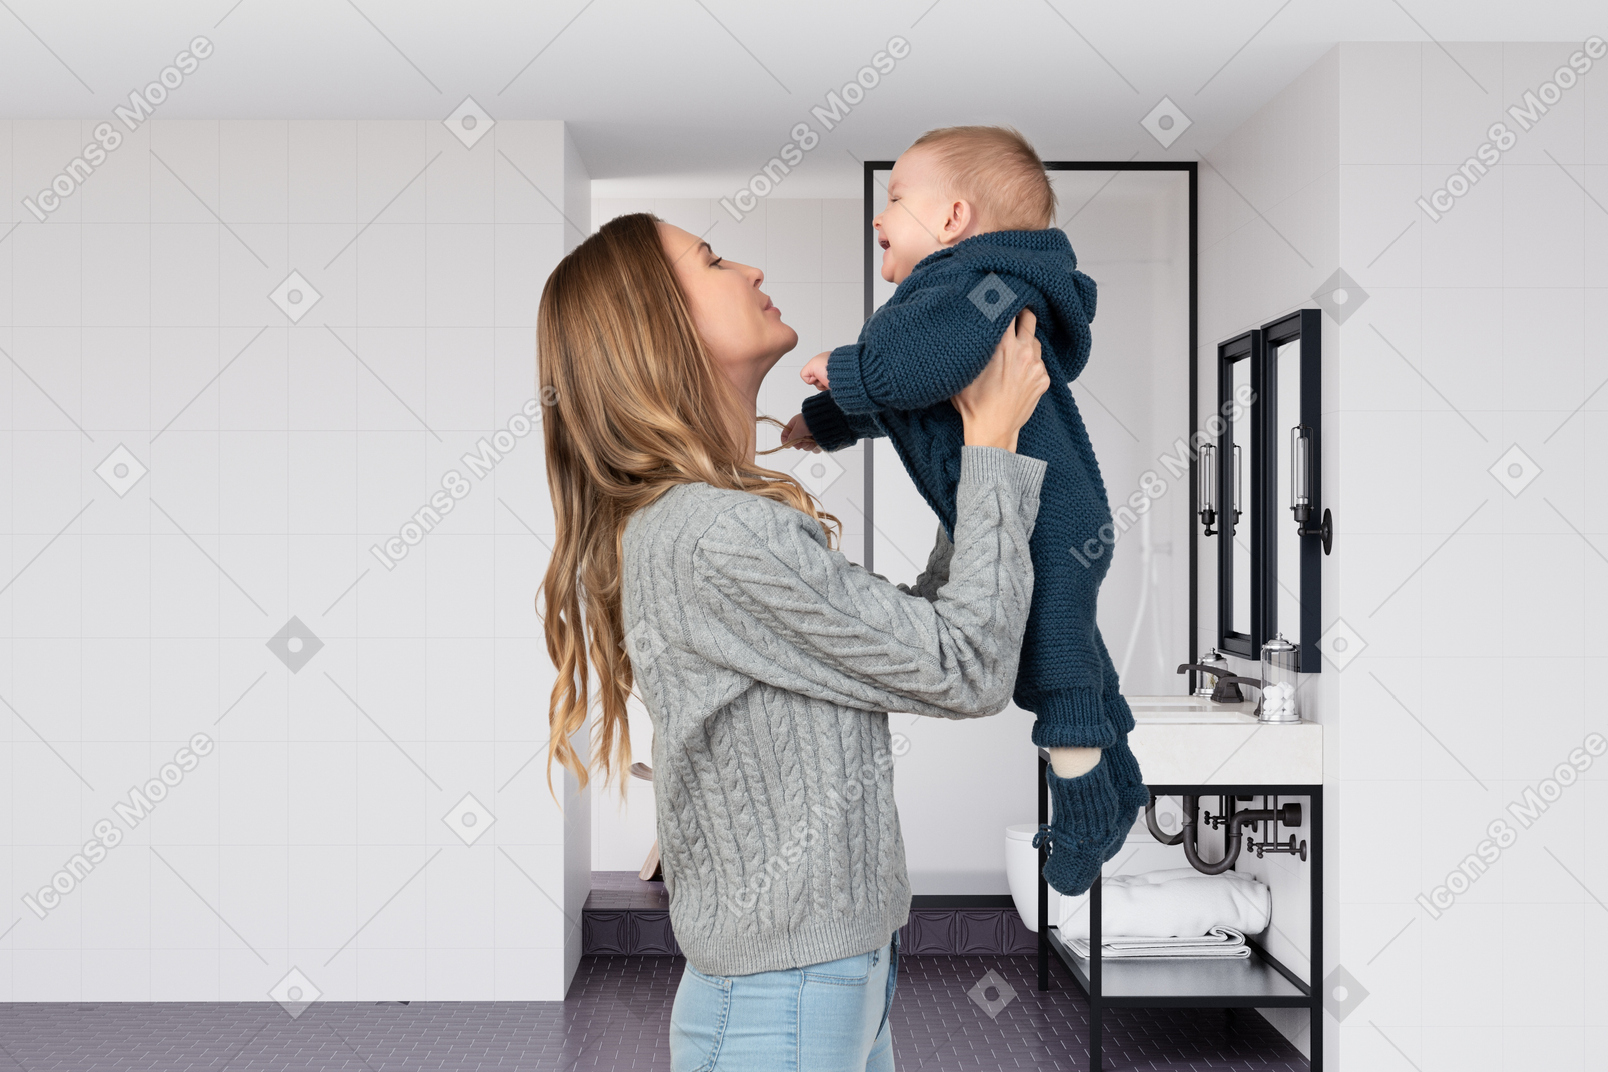 A woman holding a baby up to her face